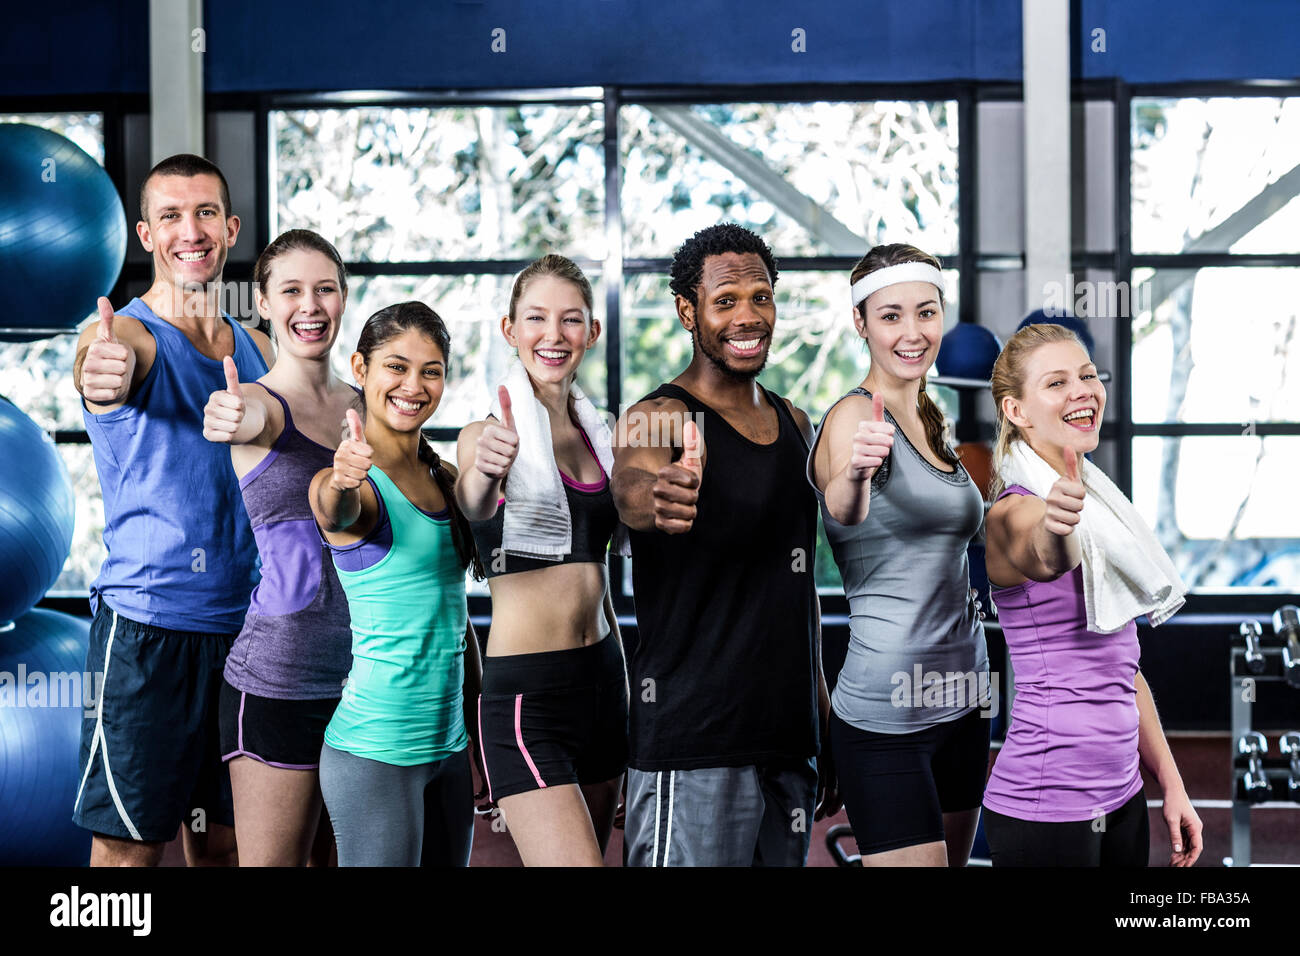 Smiling fitness class posing together with Thumbs up Banque D'Images